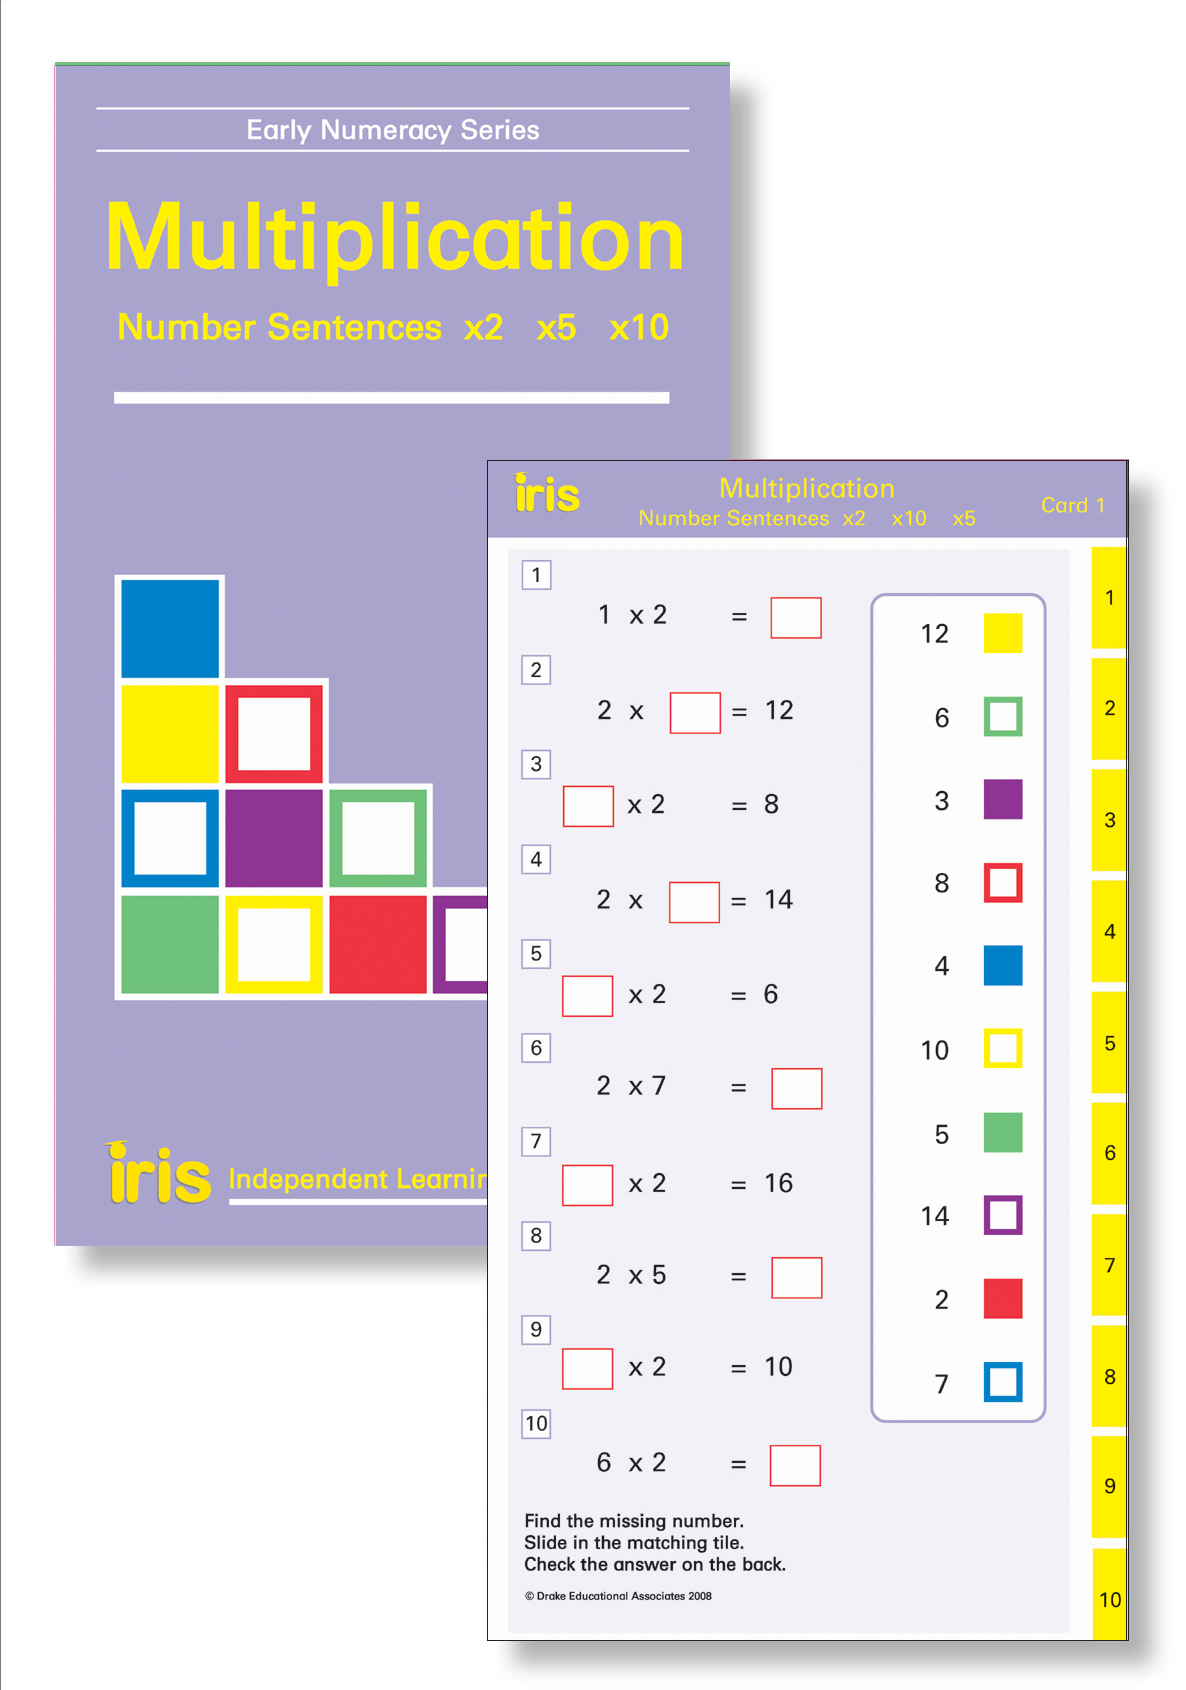 Iris Study Cards: Early Numeracy Year 2 - Unknown Numbers